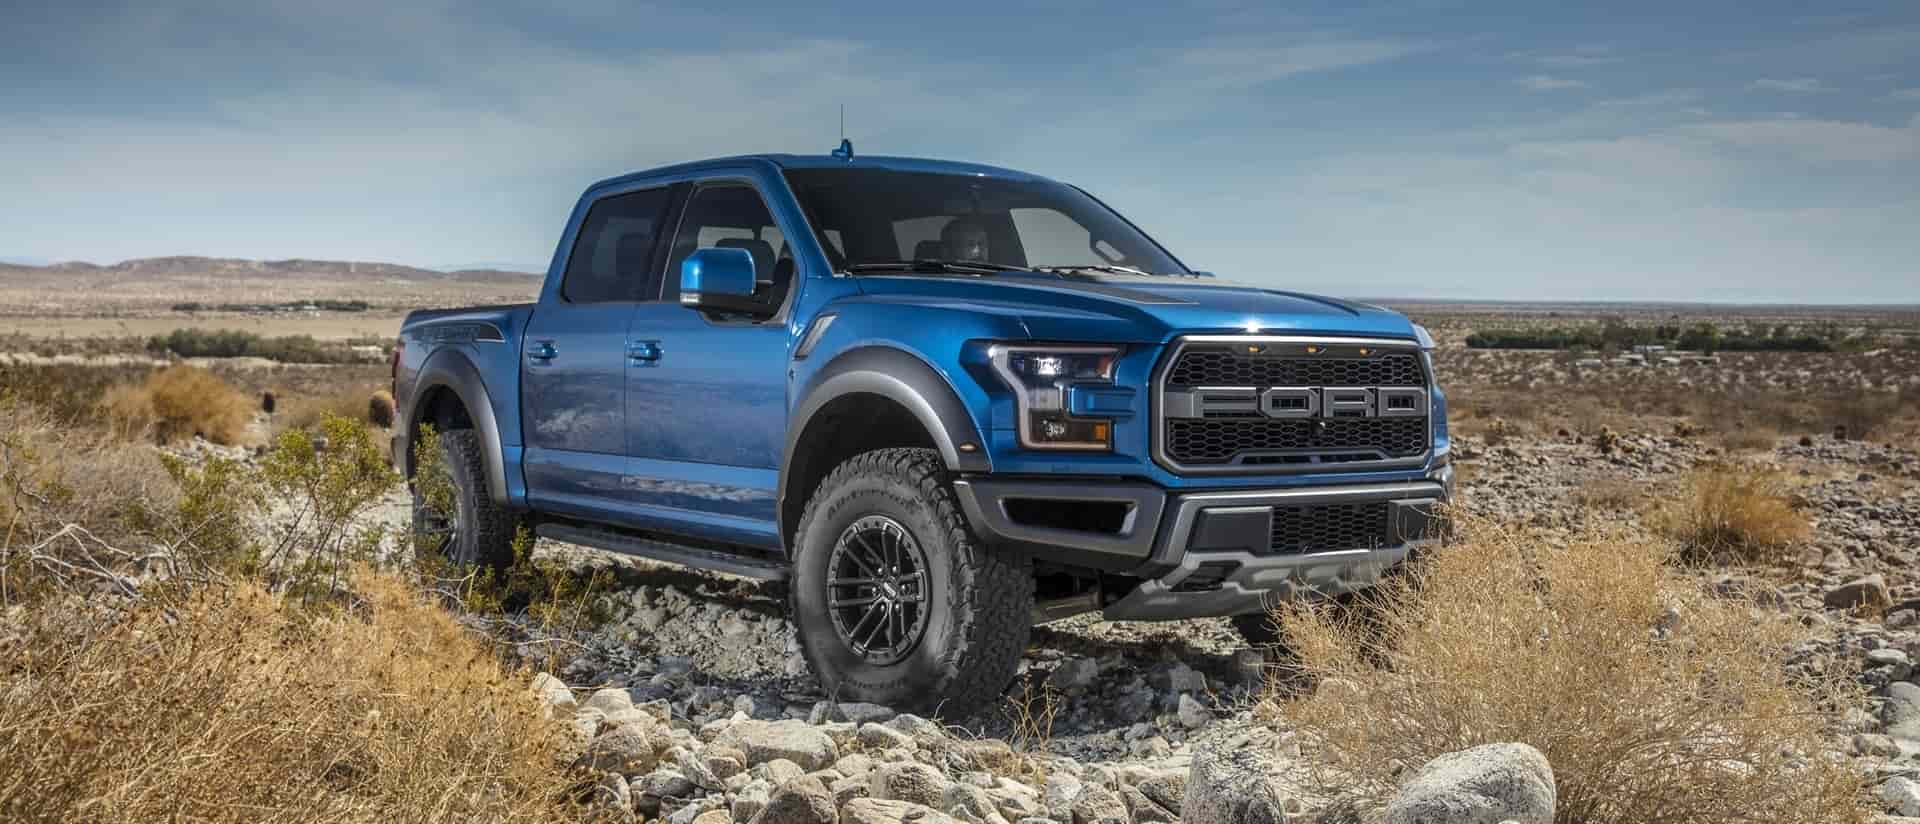 Lease a 2020 Ford F-150 near Clermont FL